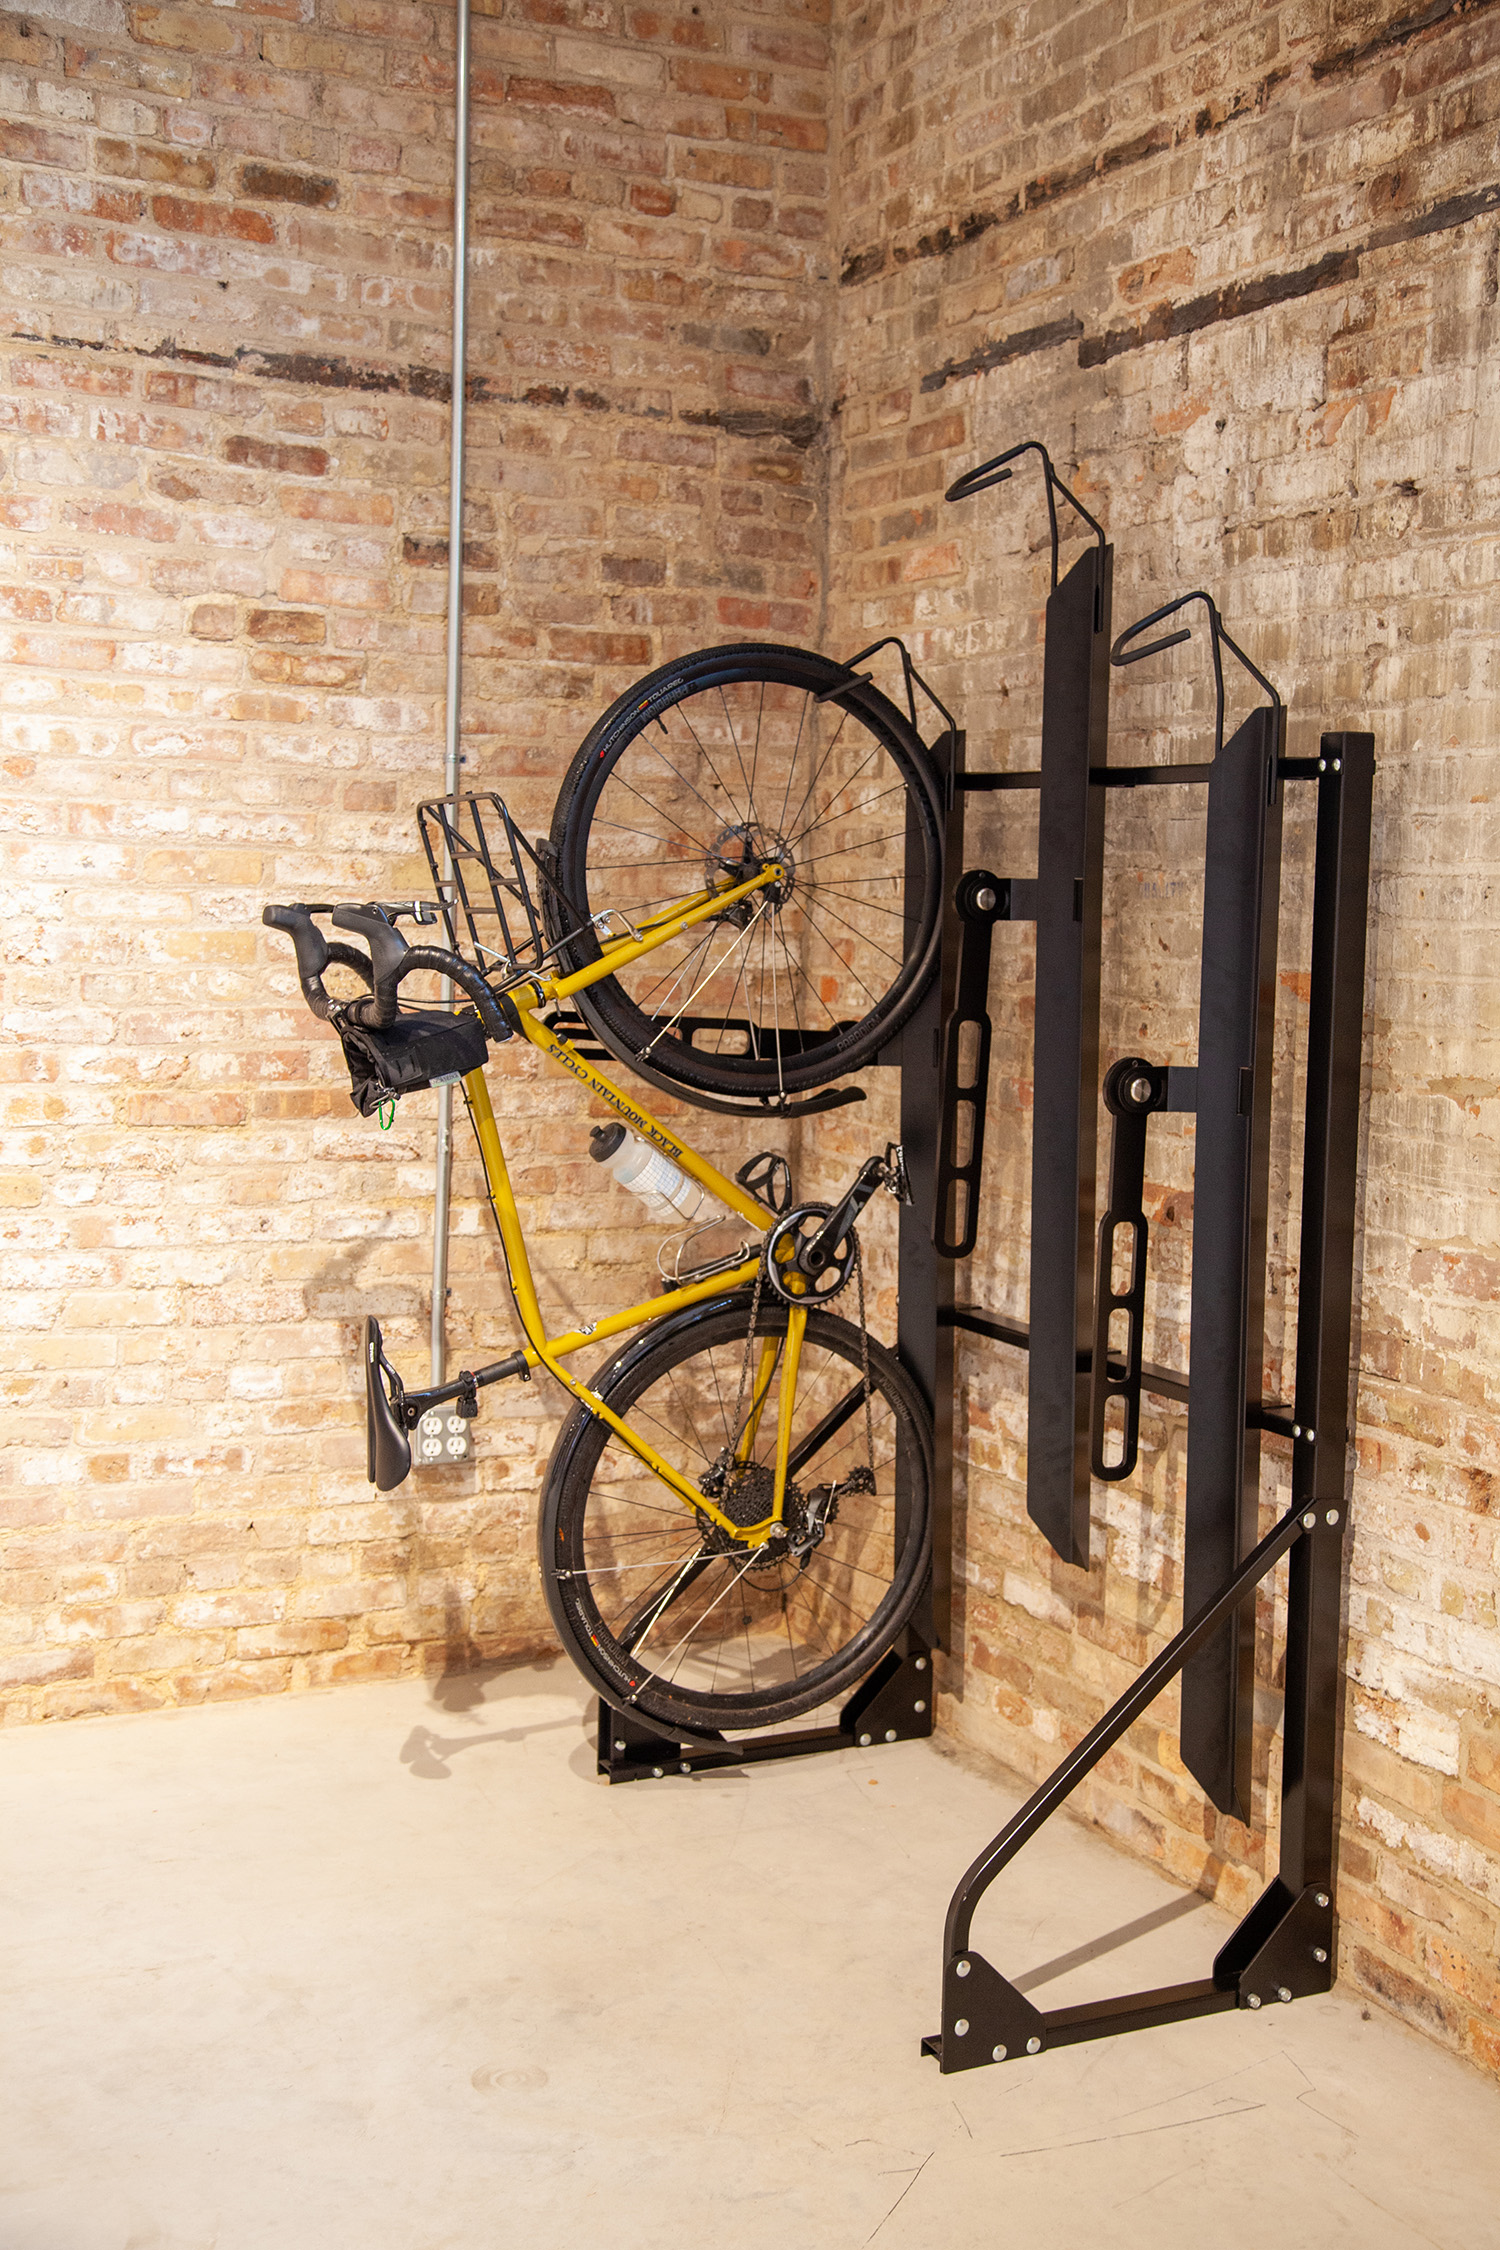 Vertical Rack being loaded with bike